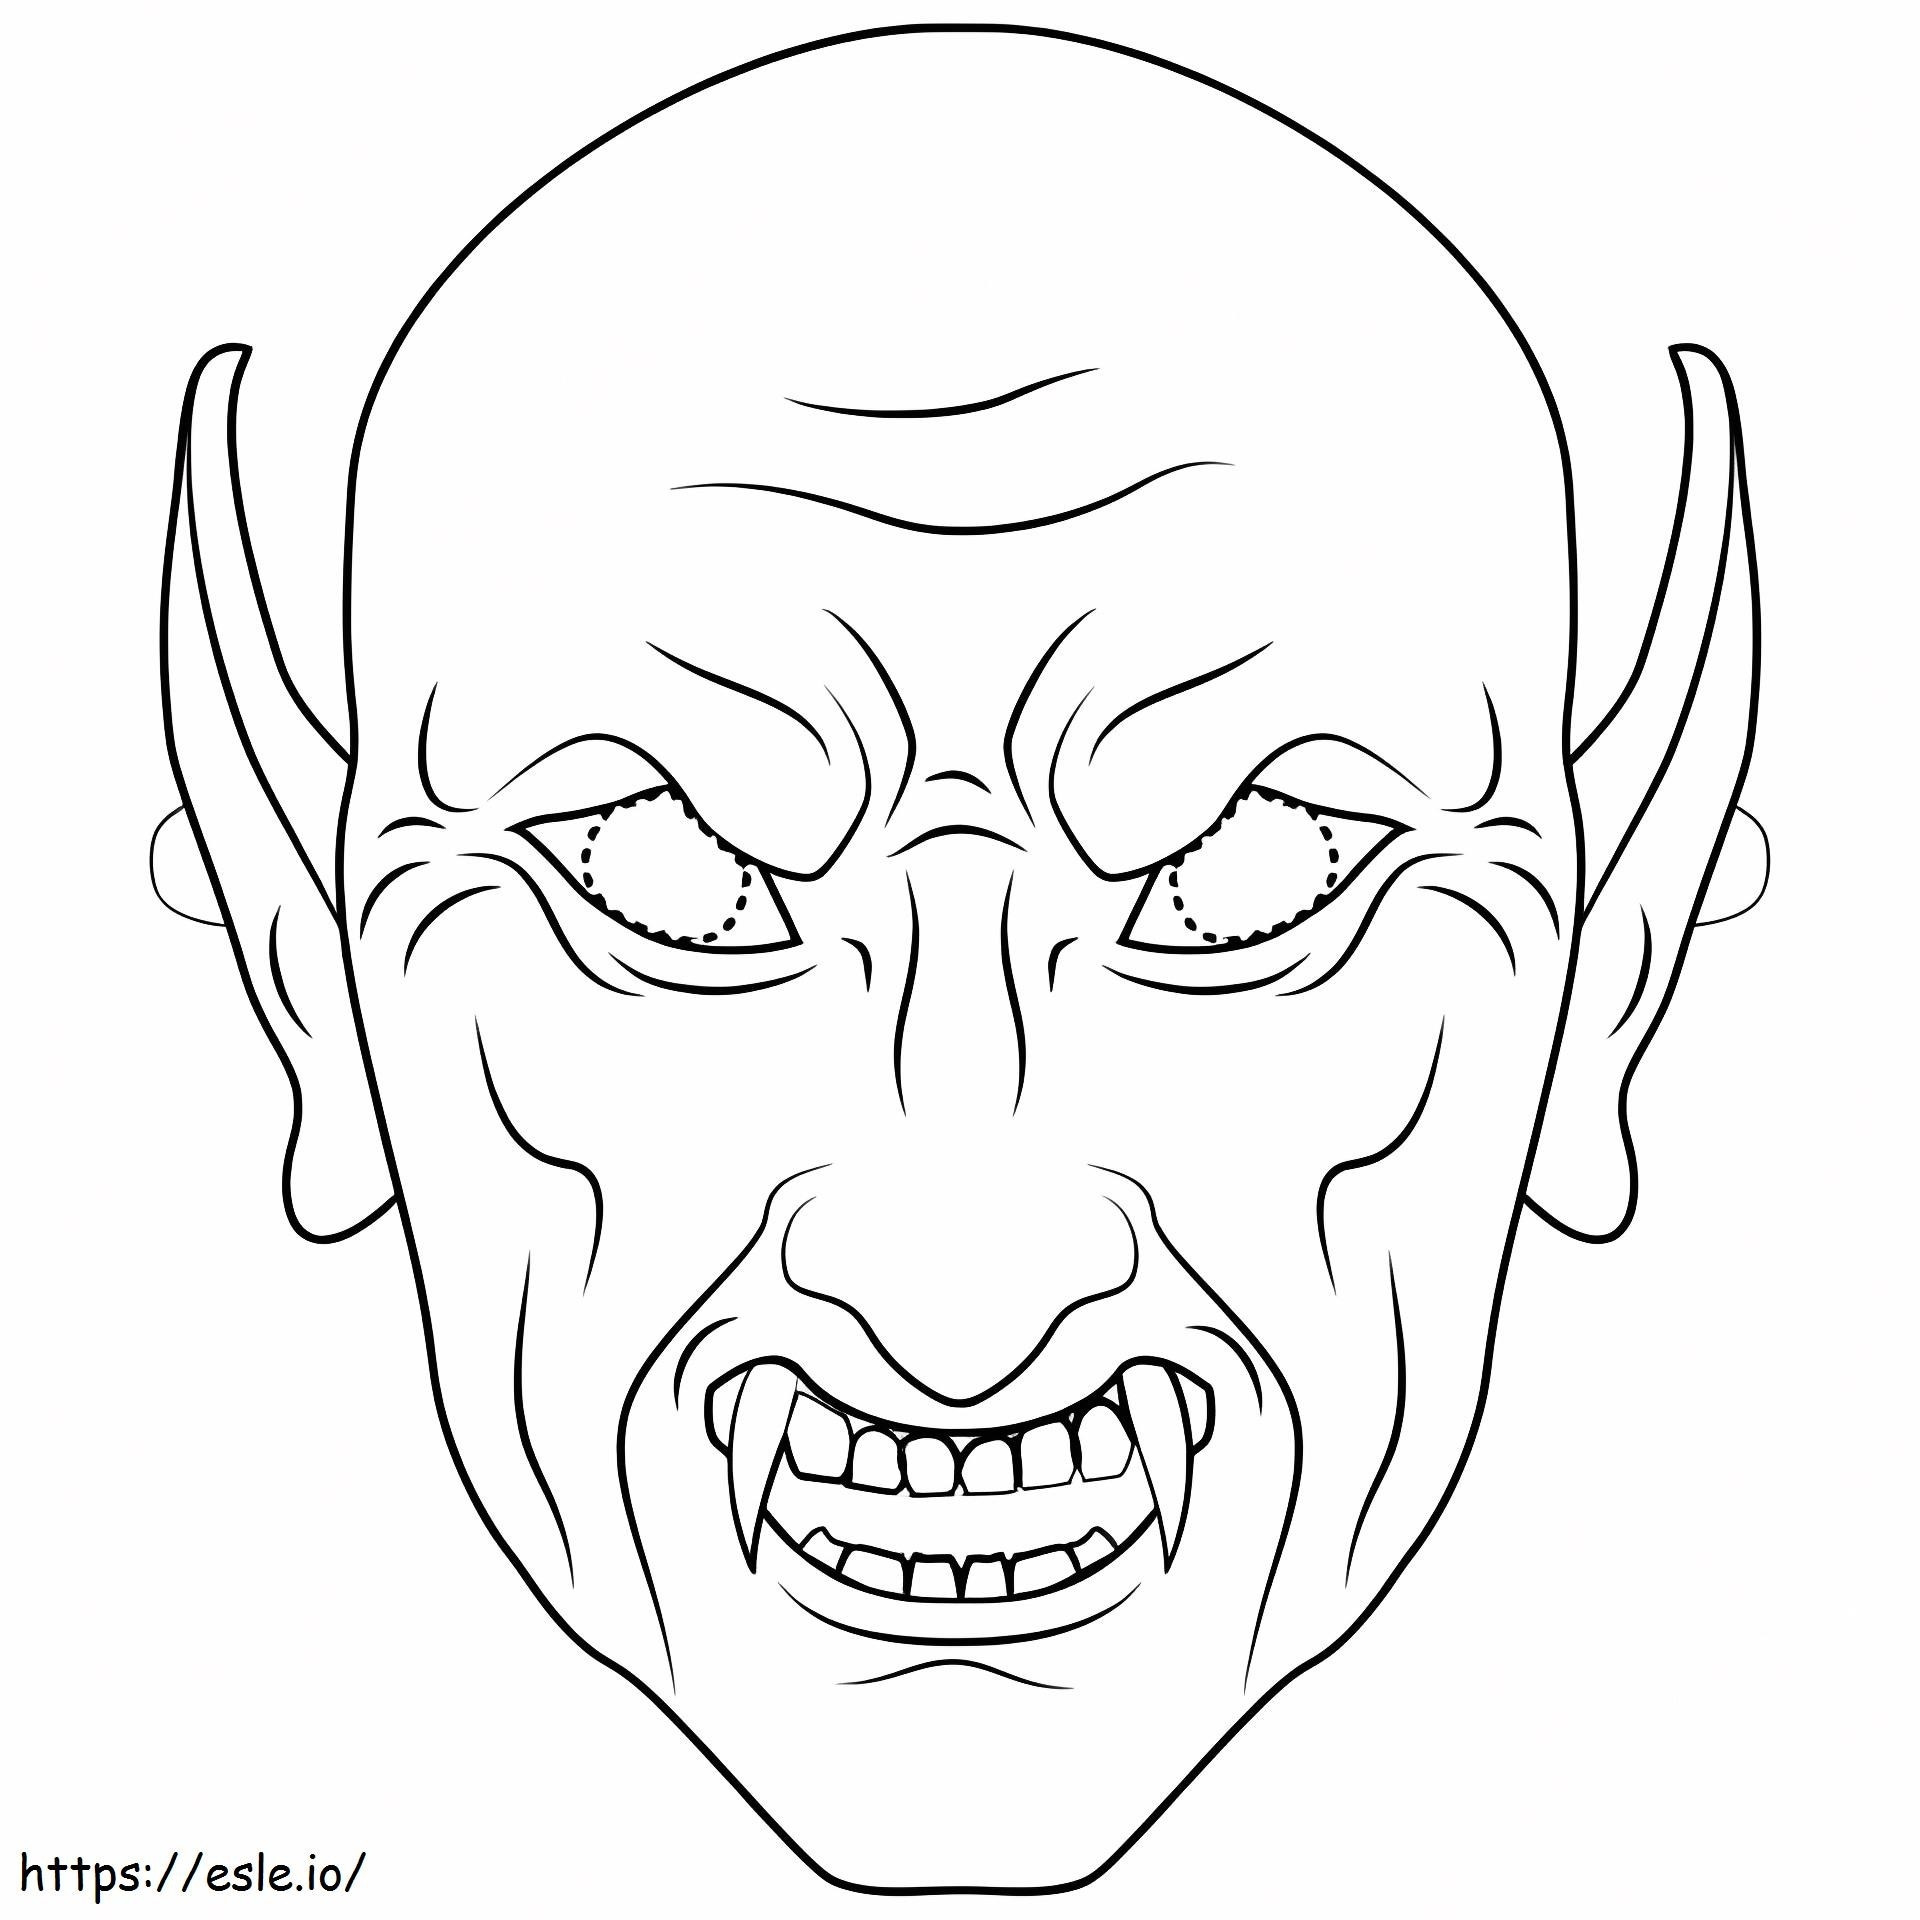 Vampire Mask coloring page